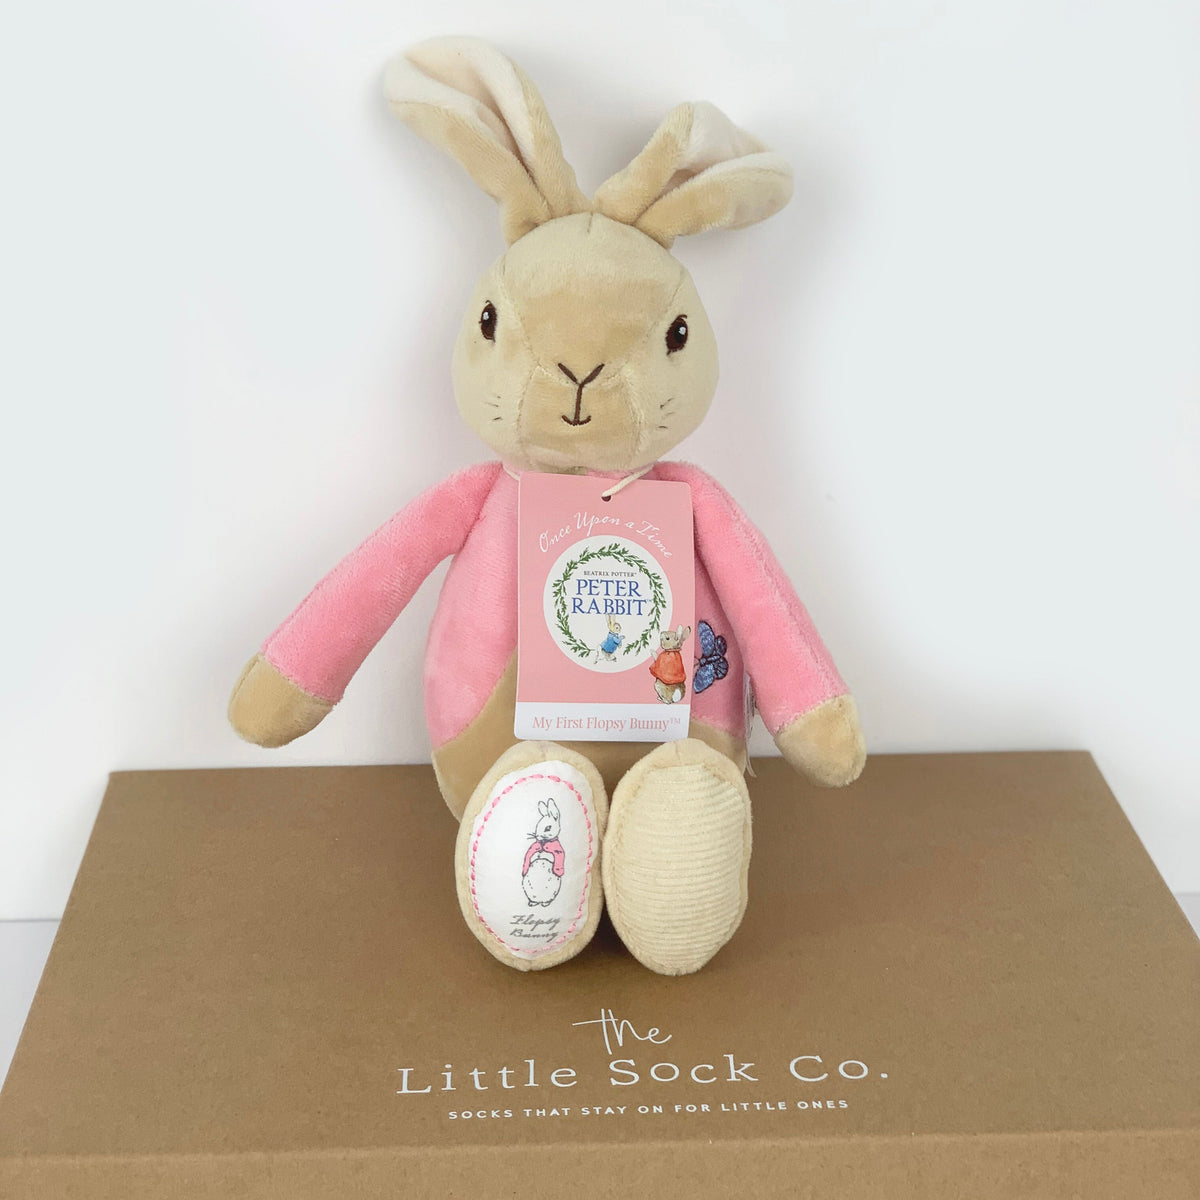 Flopsy Bunny Christmas Gift Set - Soft Cuddly Toy and Book for Baby and Toddler